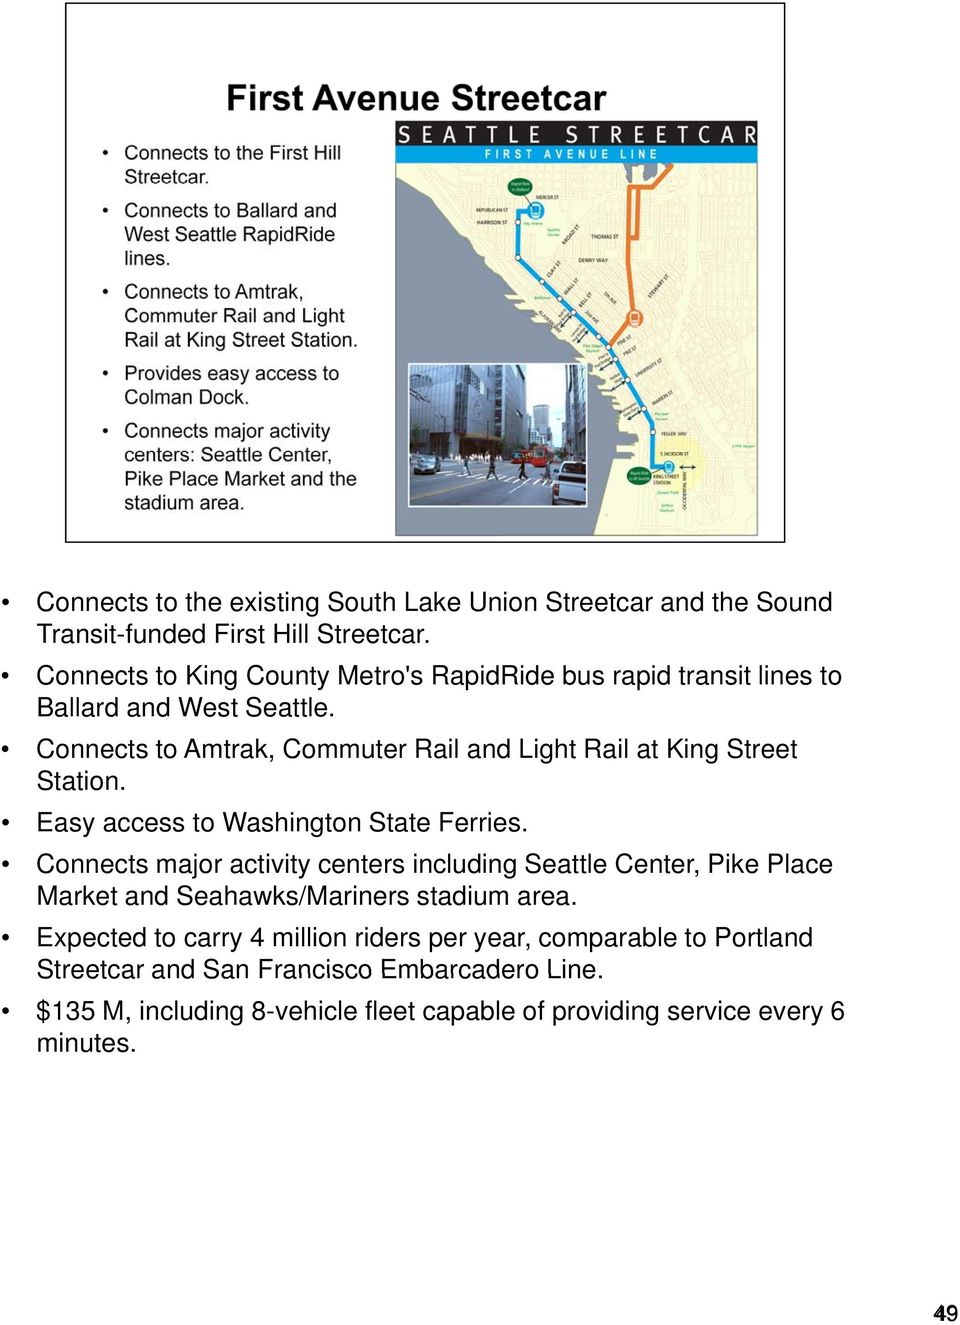 Connects to Amtrak, Commuter Rail and Light Rail at King Street Station. Easy access to Washington State Ferries.